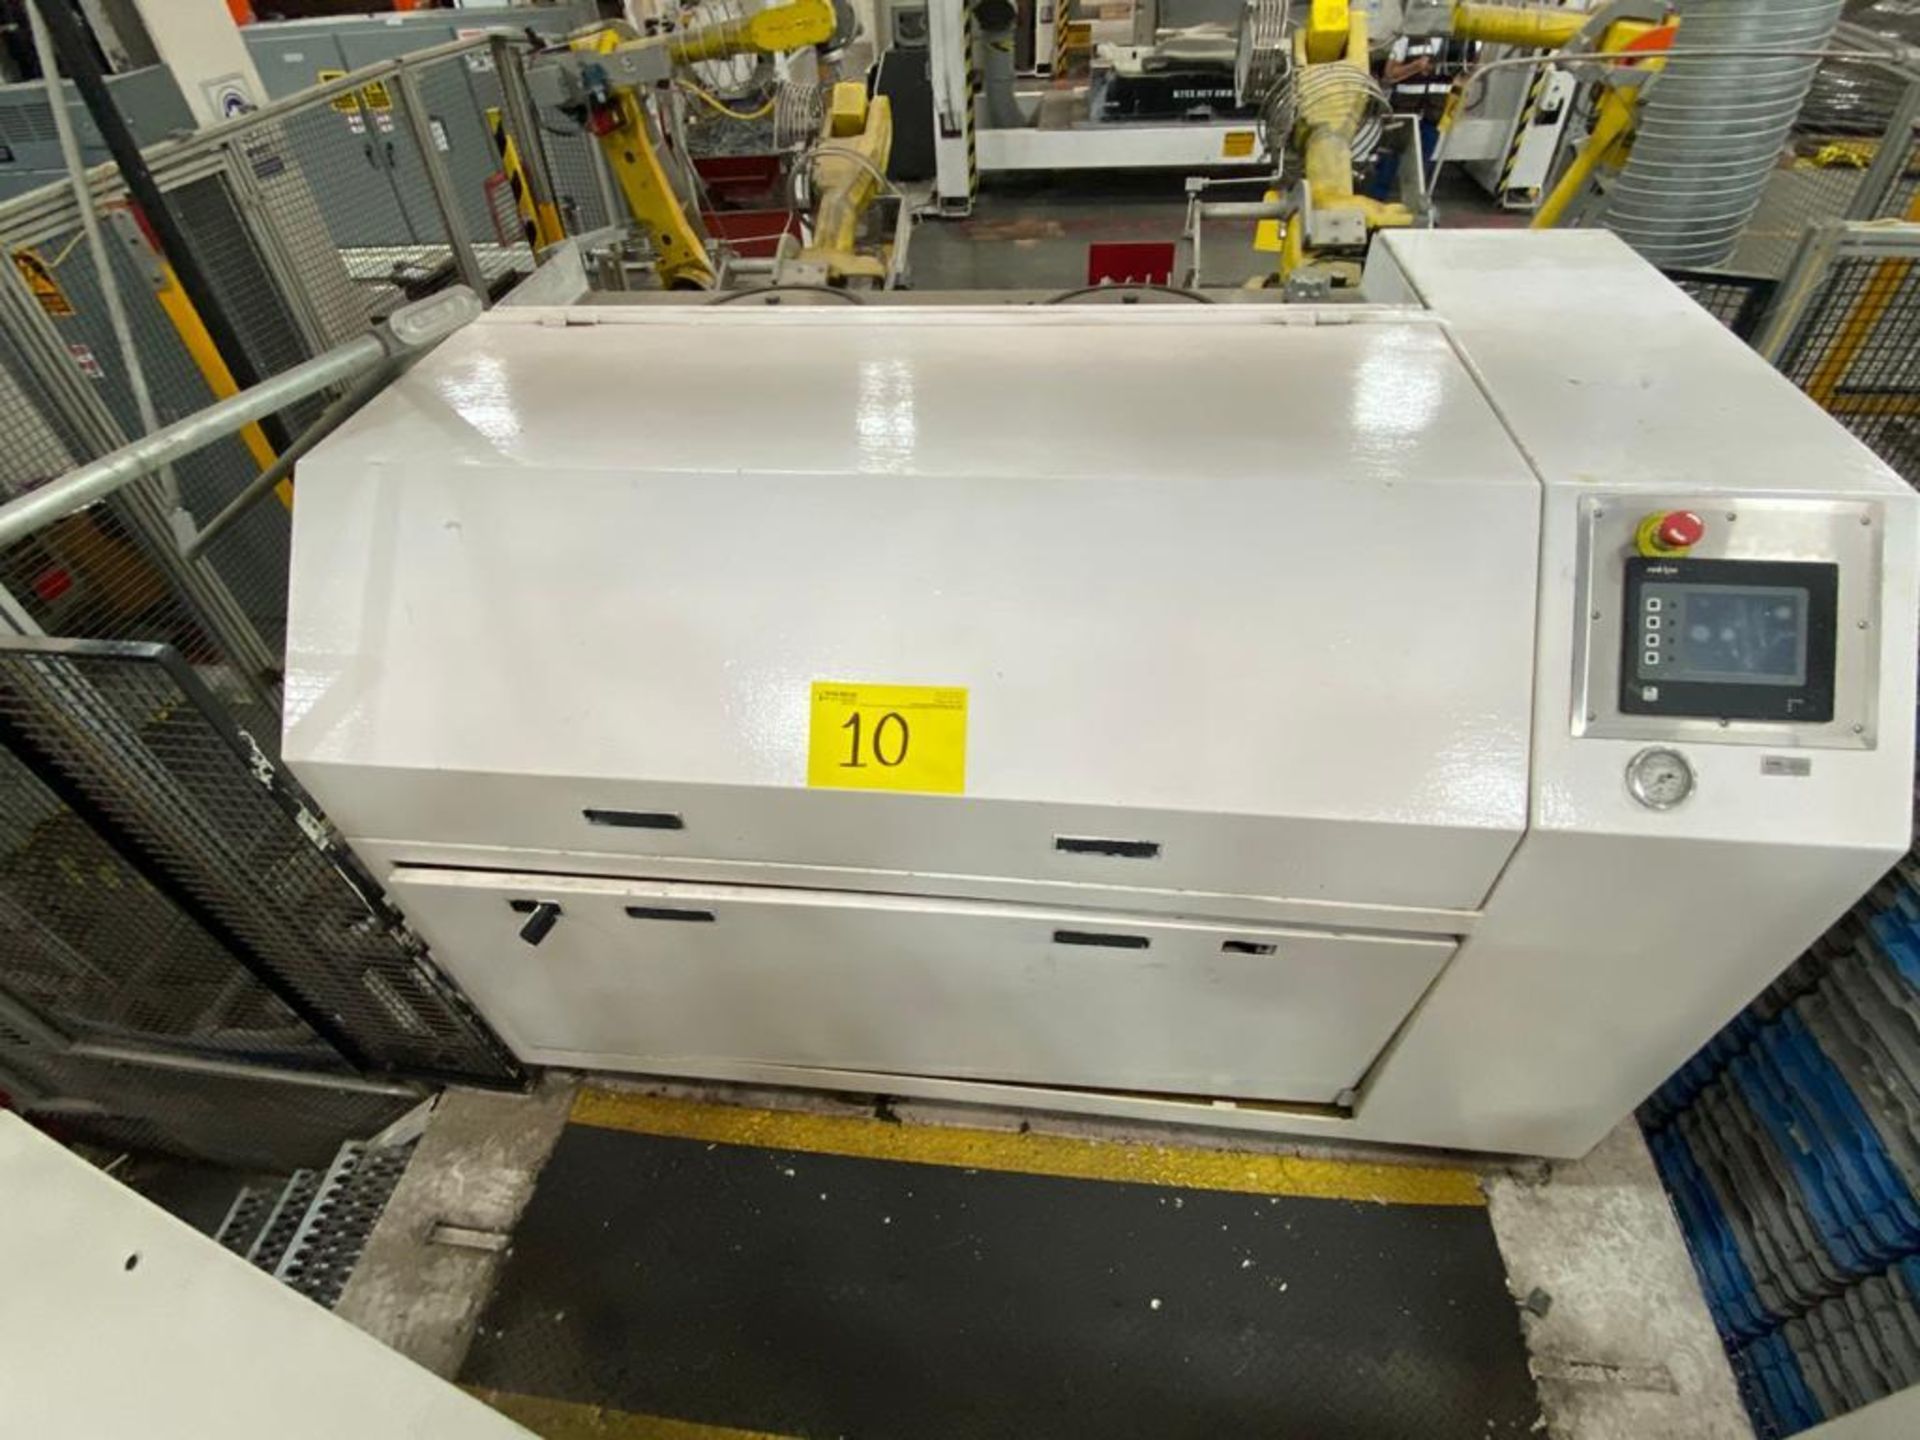 2012 H2O JET Waterjet Cutting Systems, Model 303002-1-EE-4S-102 - Image 2 of 38